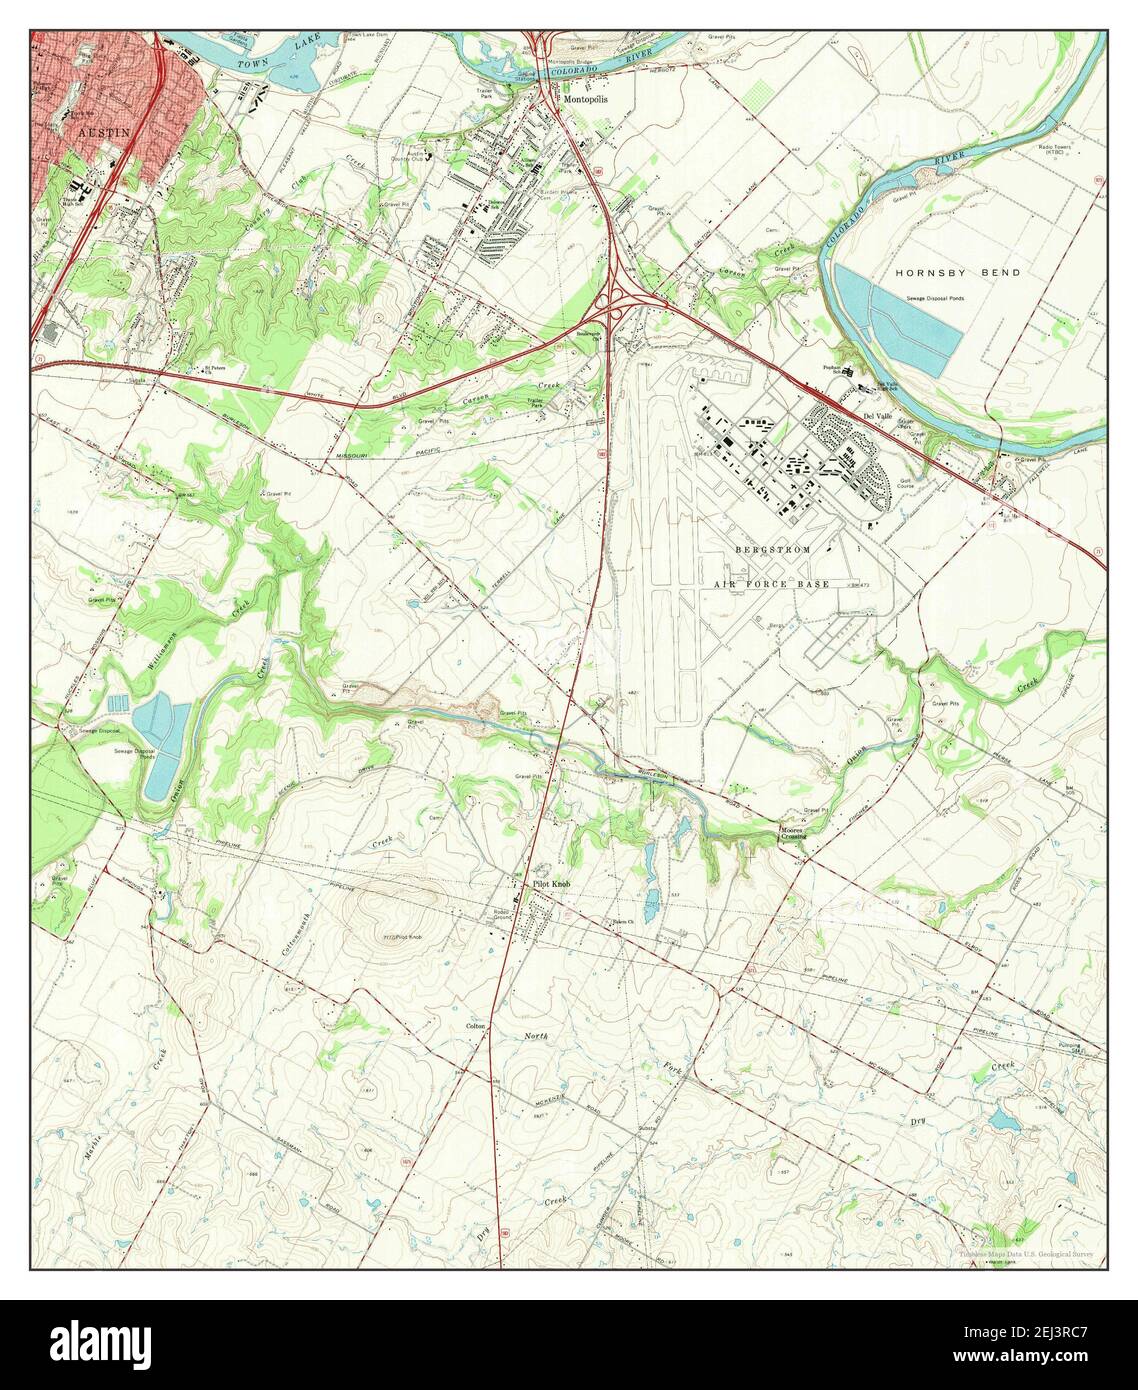 Montopolis, Texas, map 1966, 1:24000, United States of America by Timeless Maps, data U.S. Geological Survey Stock Photo